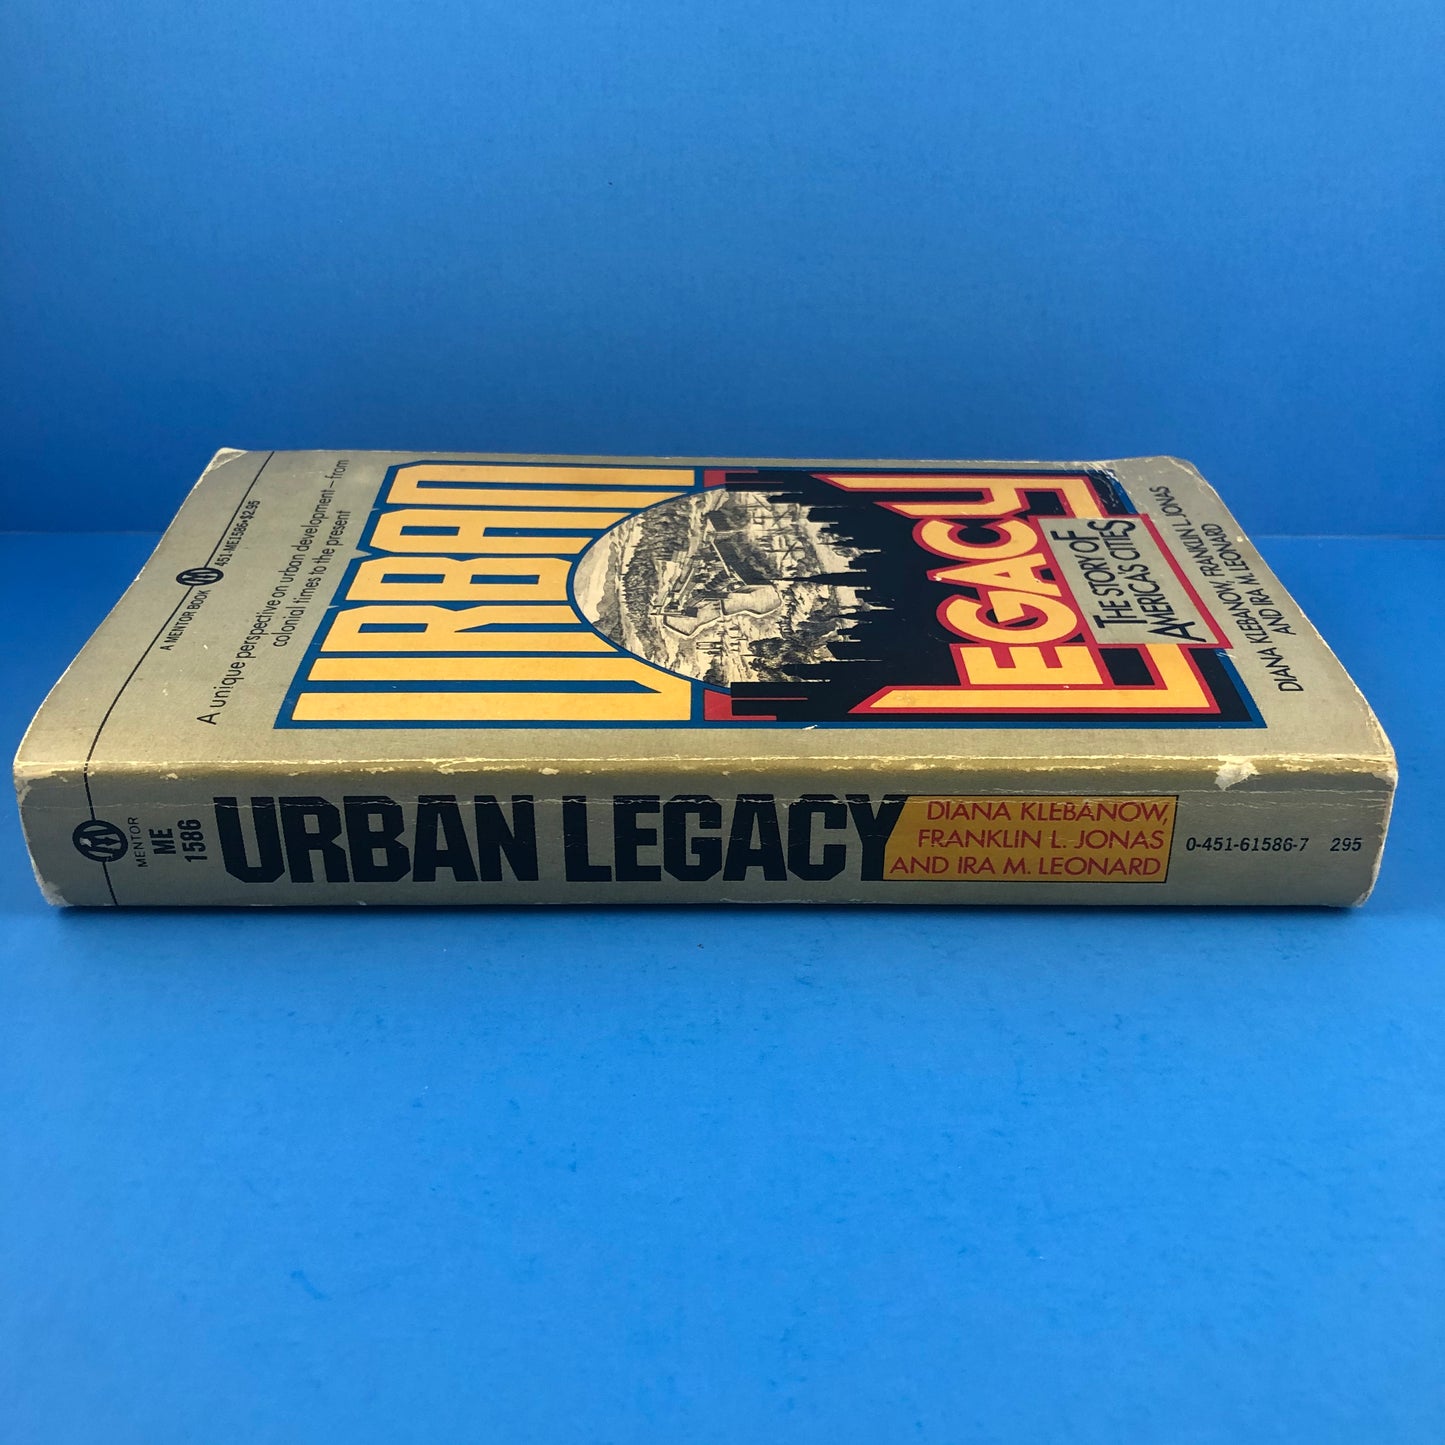 Urban Legacy: The Story of America's Cities